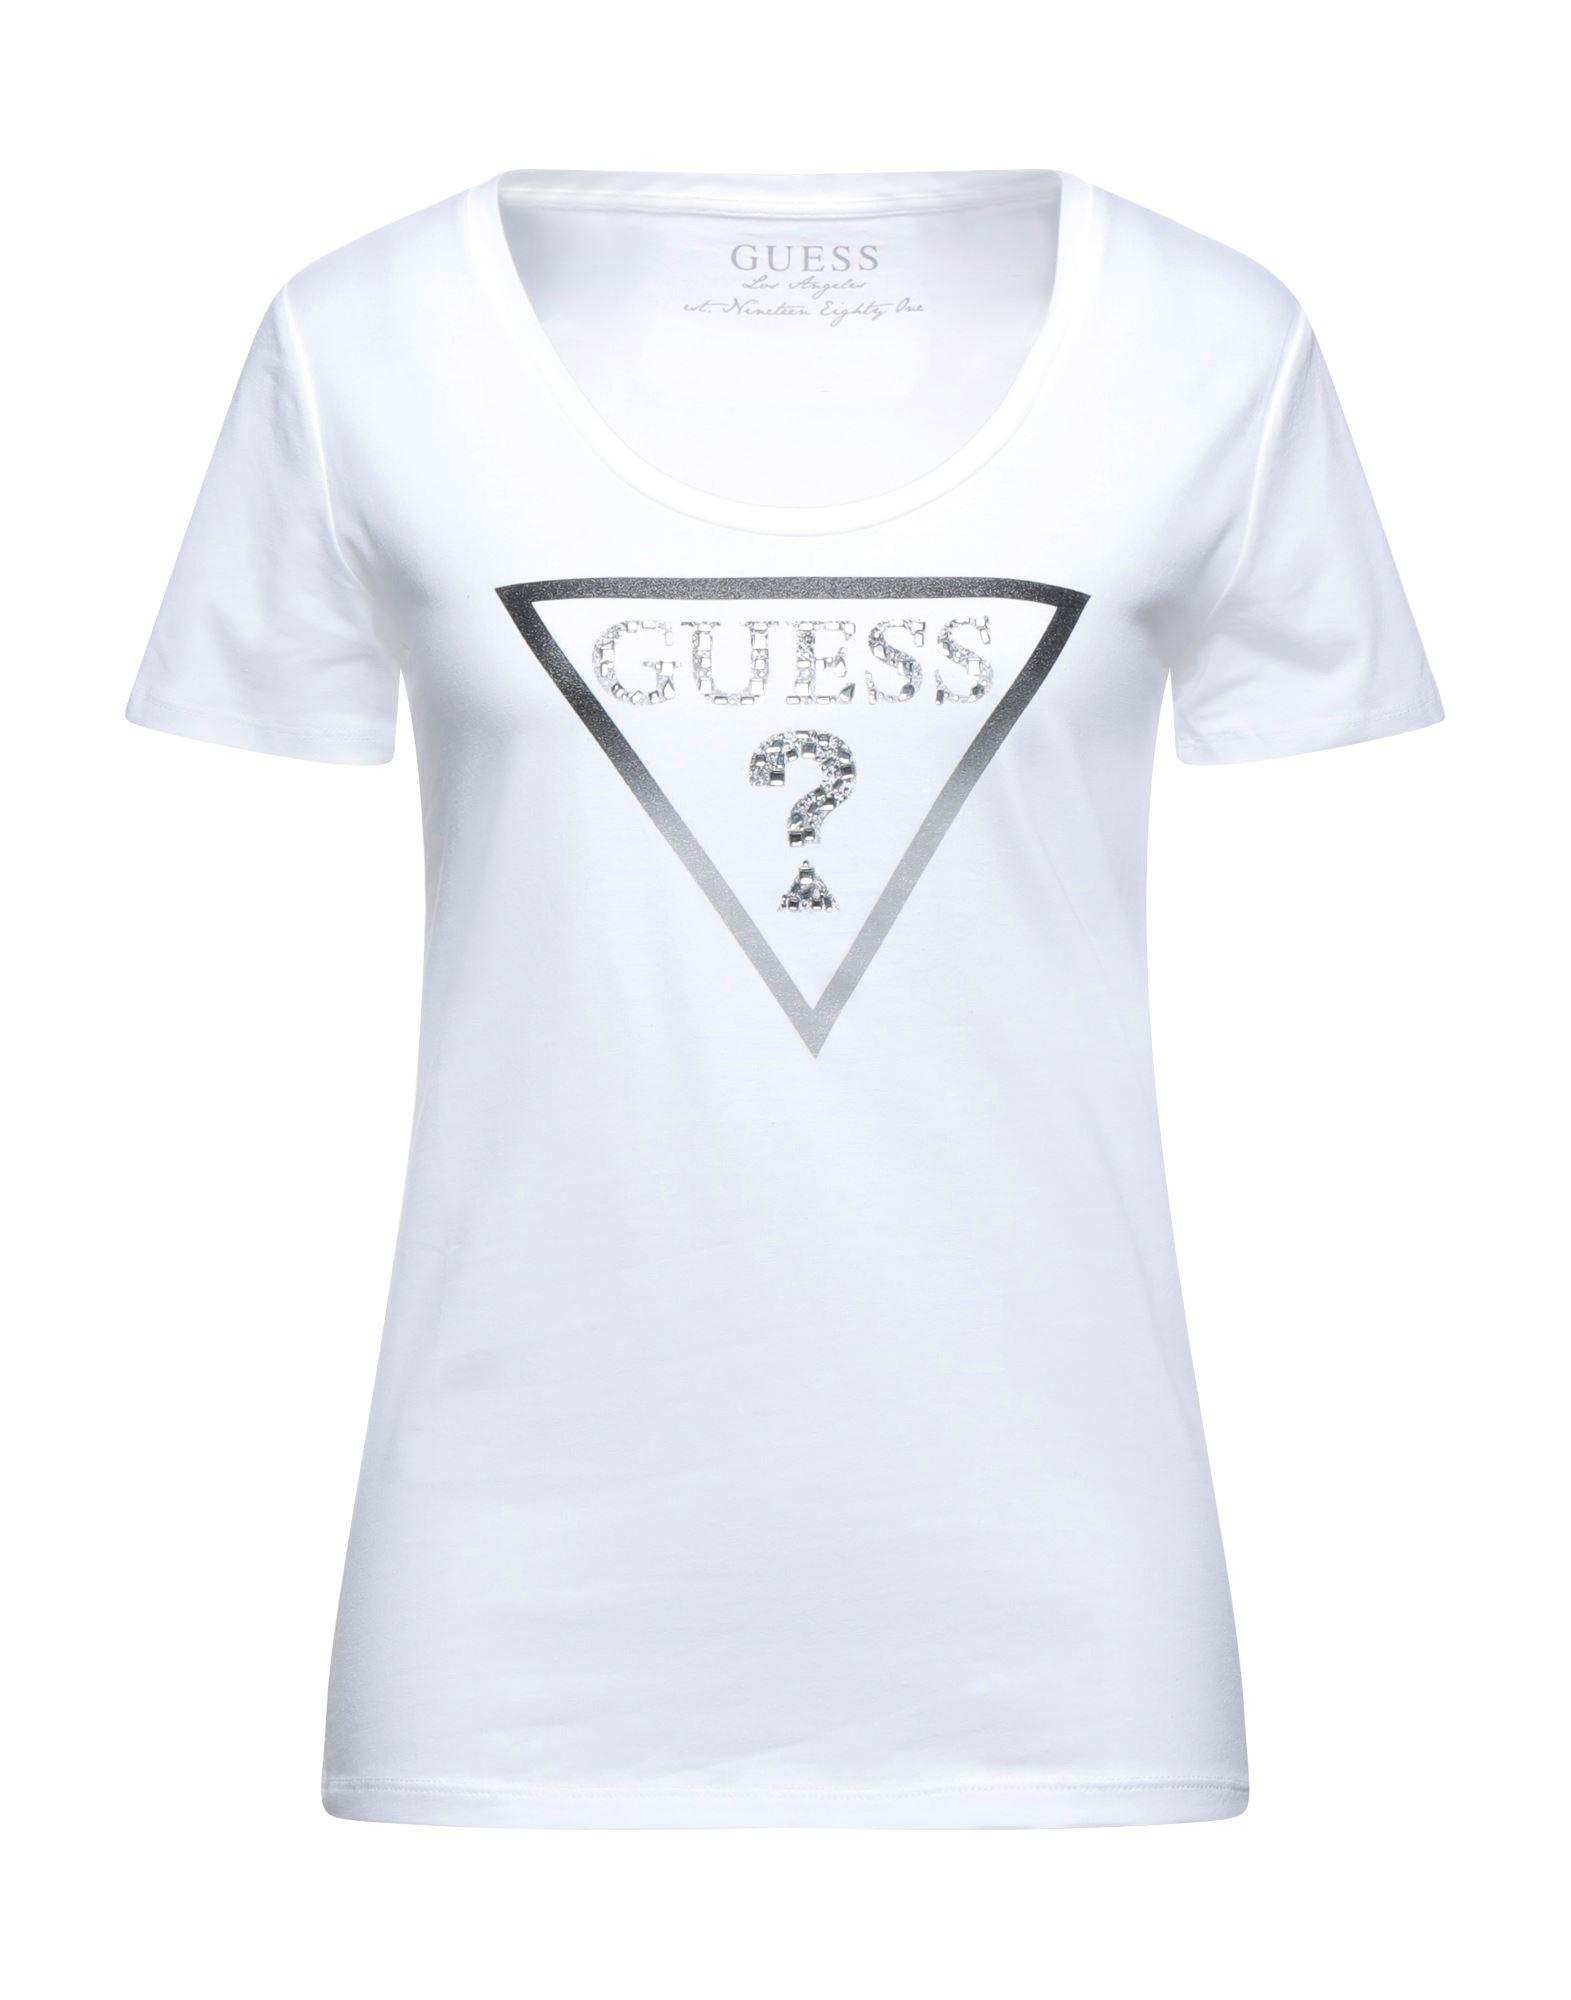 t-shirt guess new collection